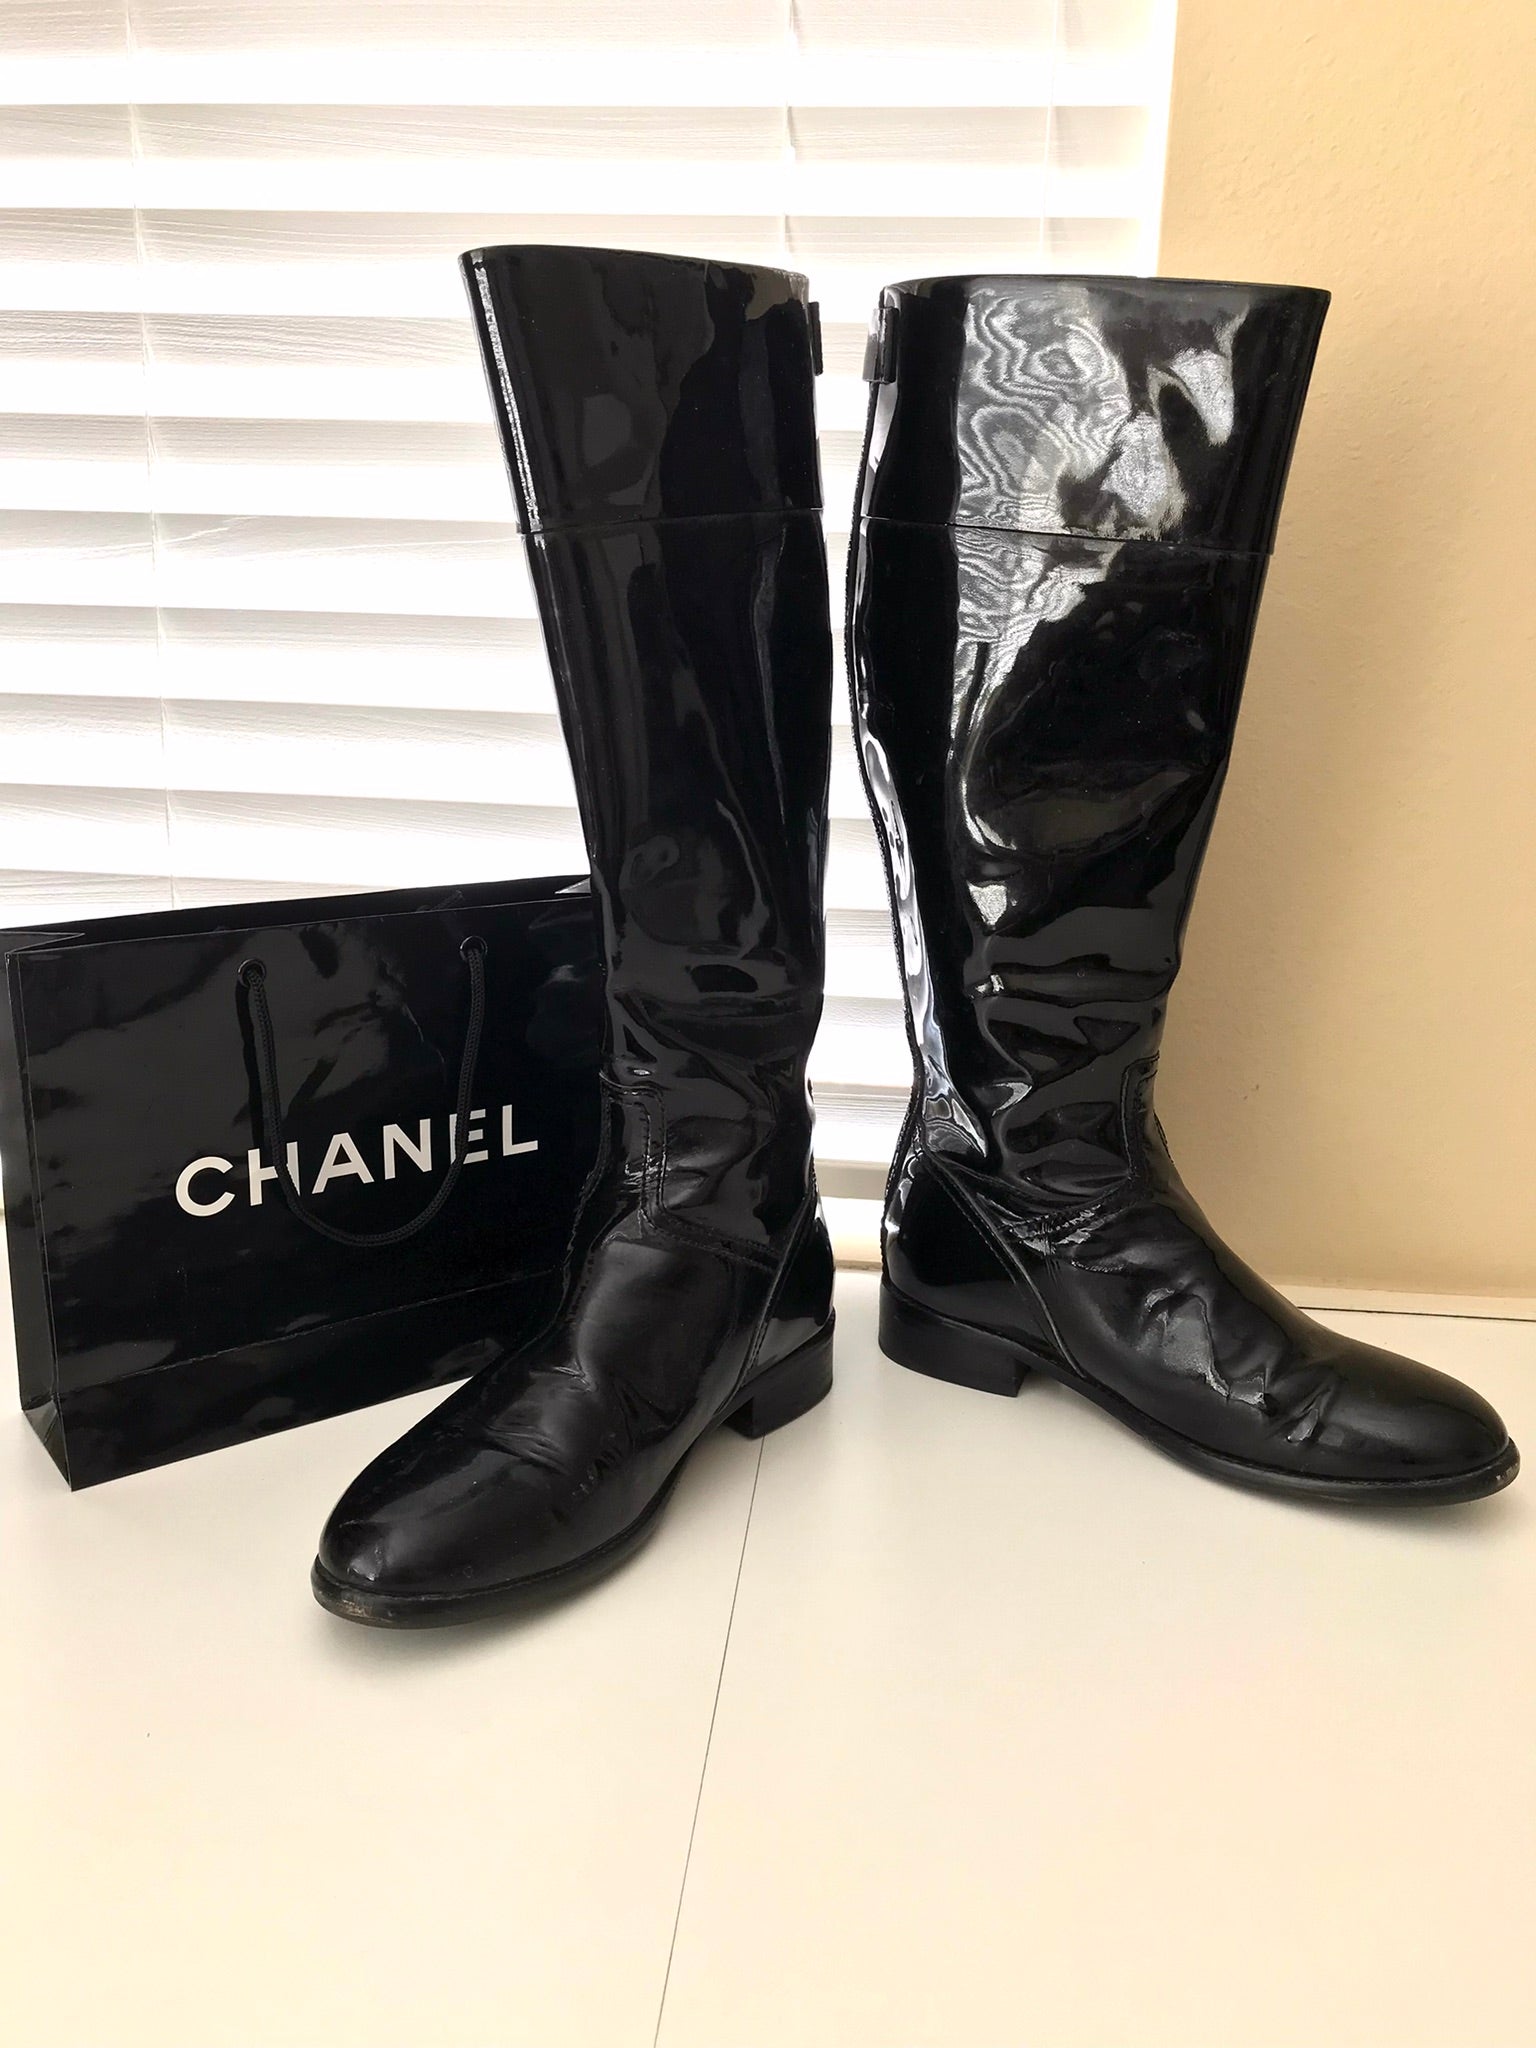 Vintage Tall CHANEL Boots size 41 Low Heel